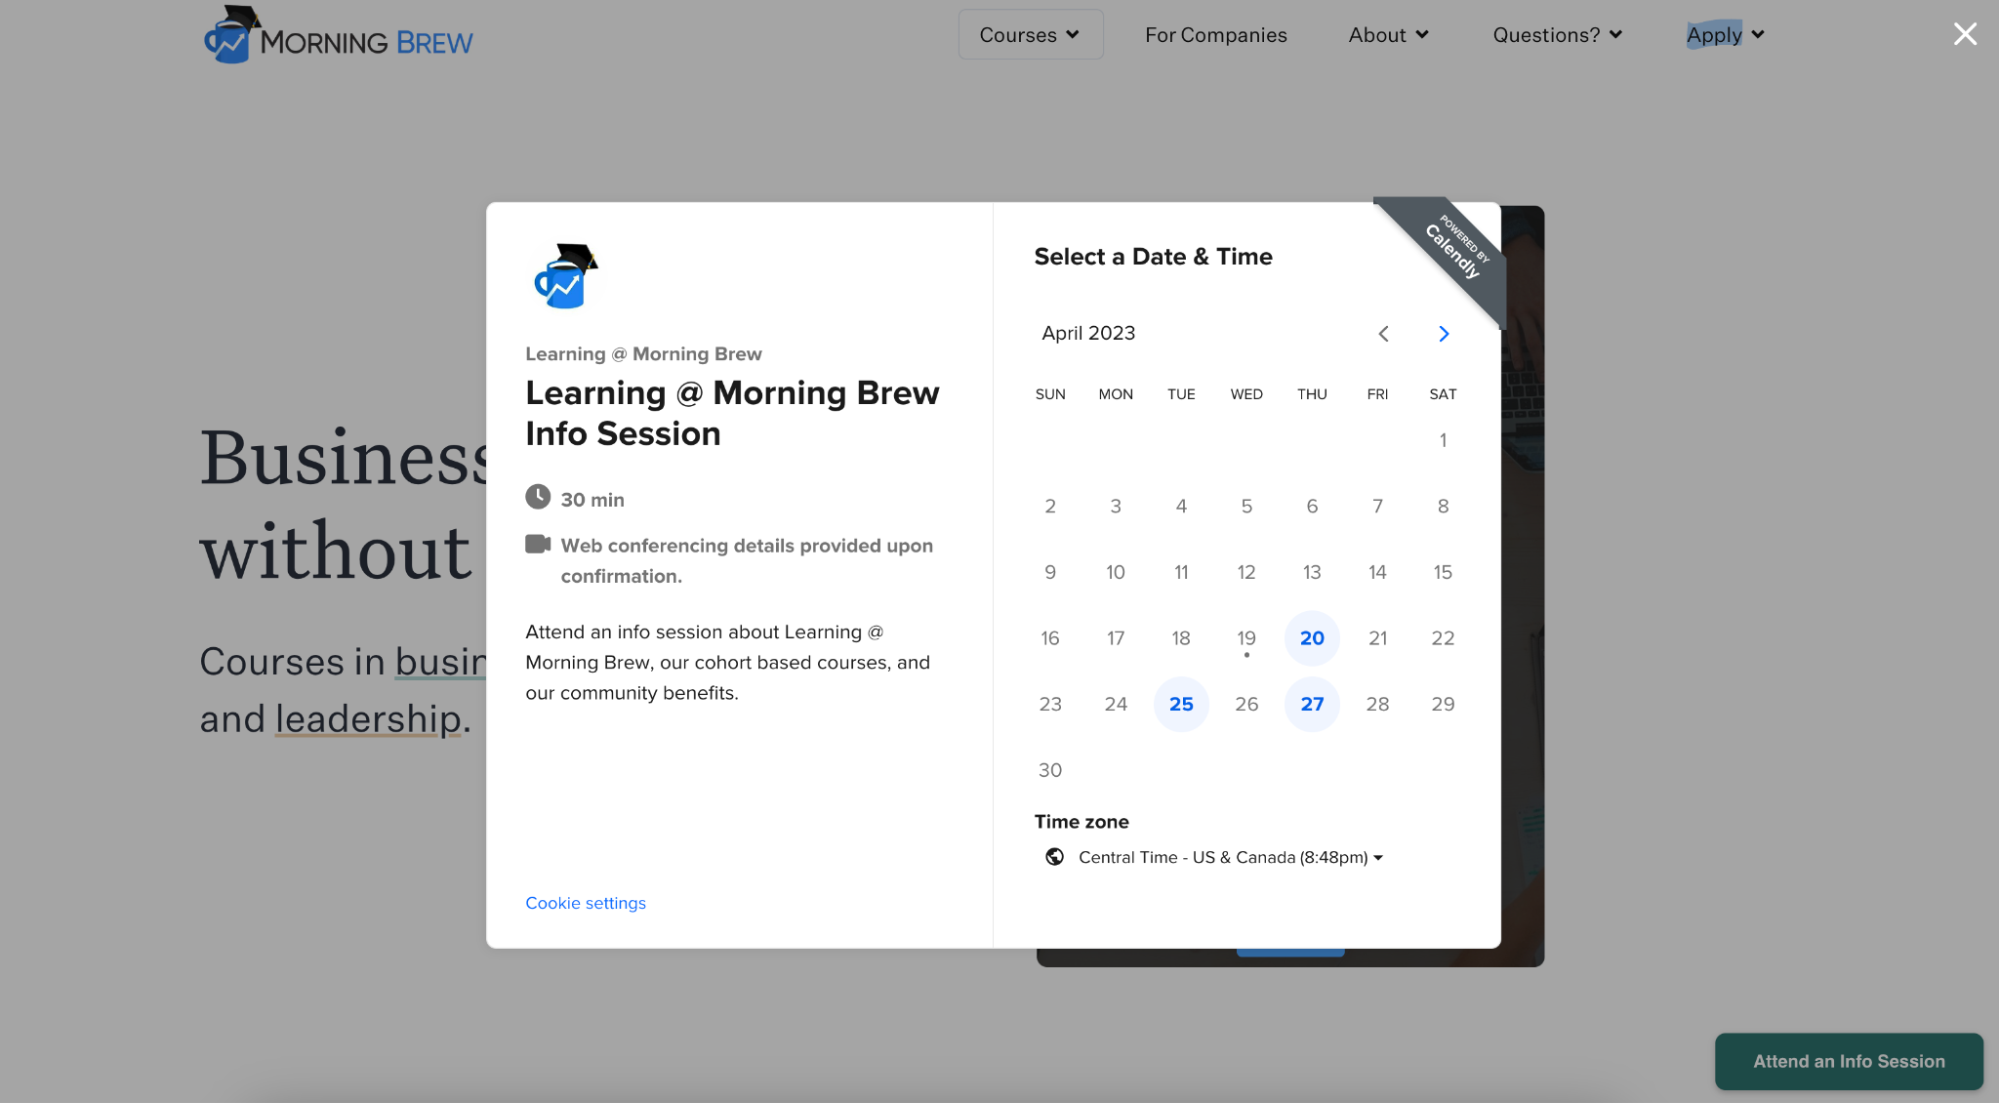 Screenshot of the Morning Brew website. There is a button that says "Attend an Info Session" in the lower right-hand corner. A pop-up shows the Calendly booking page for a "Learning @ Morning Brew Info Session" event.